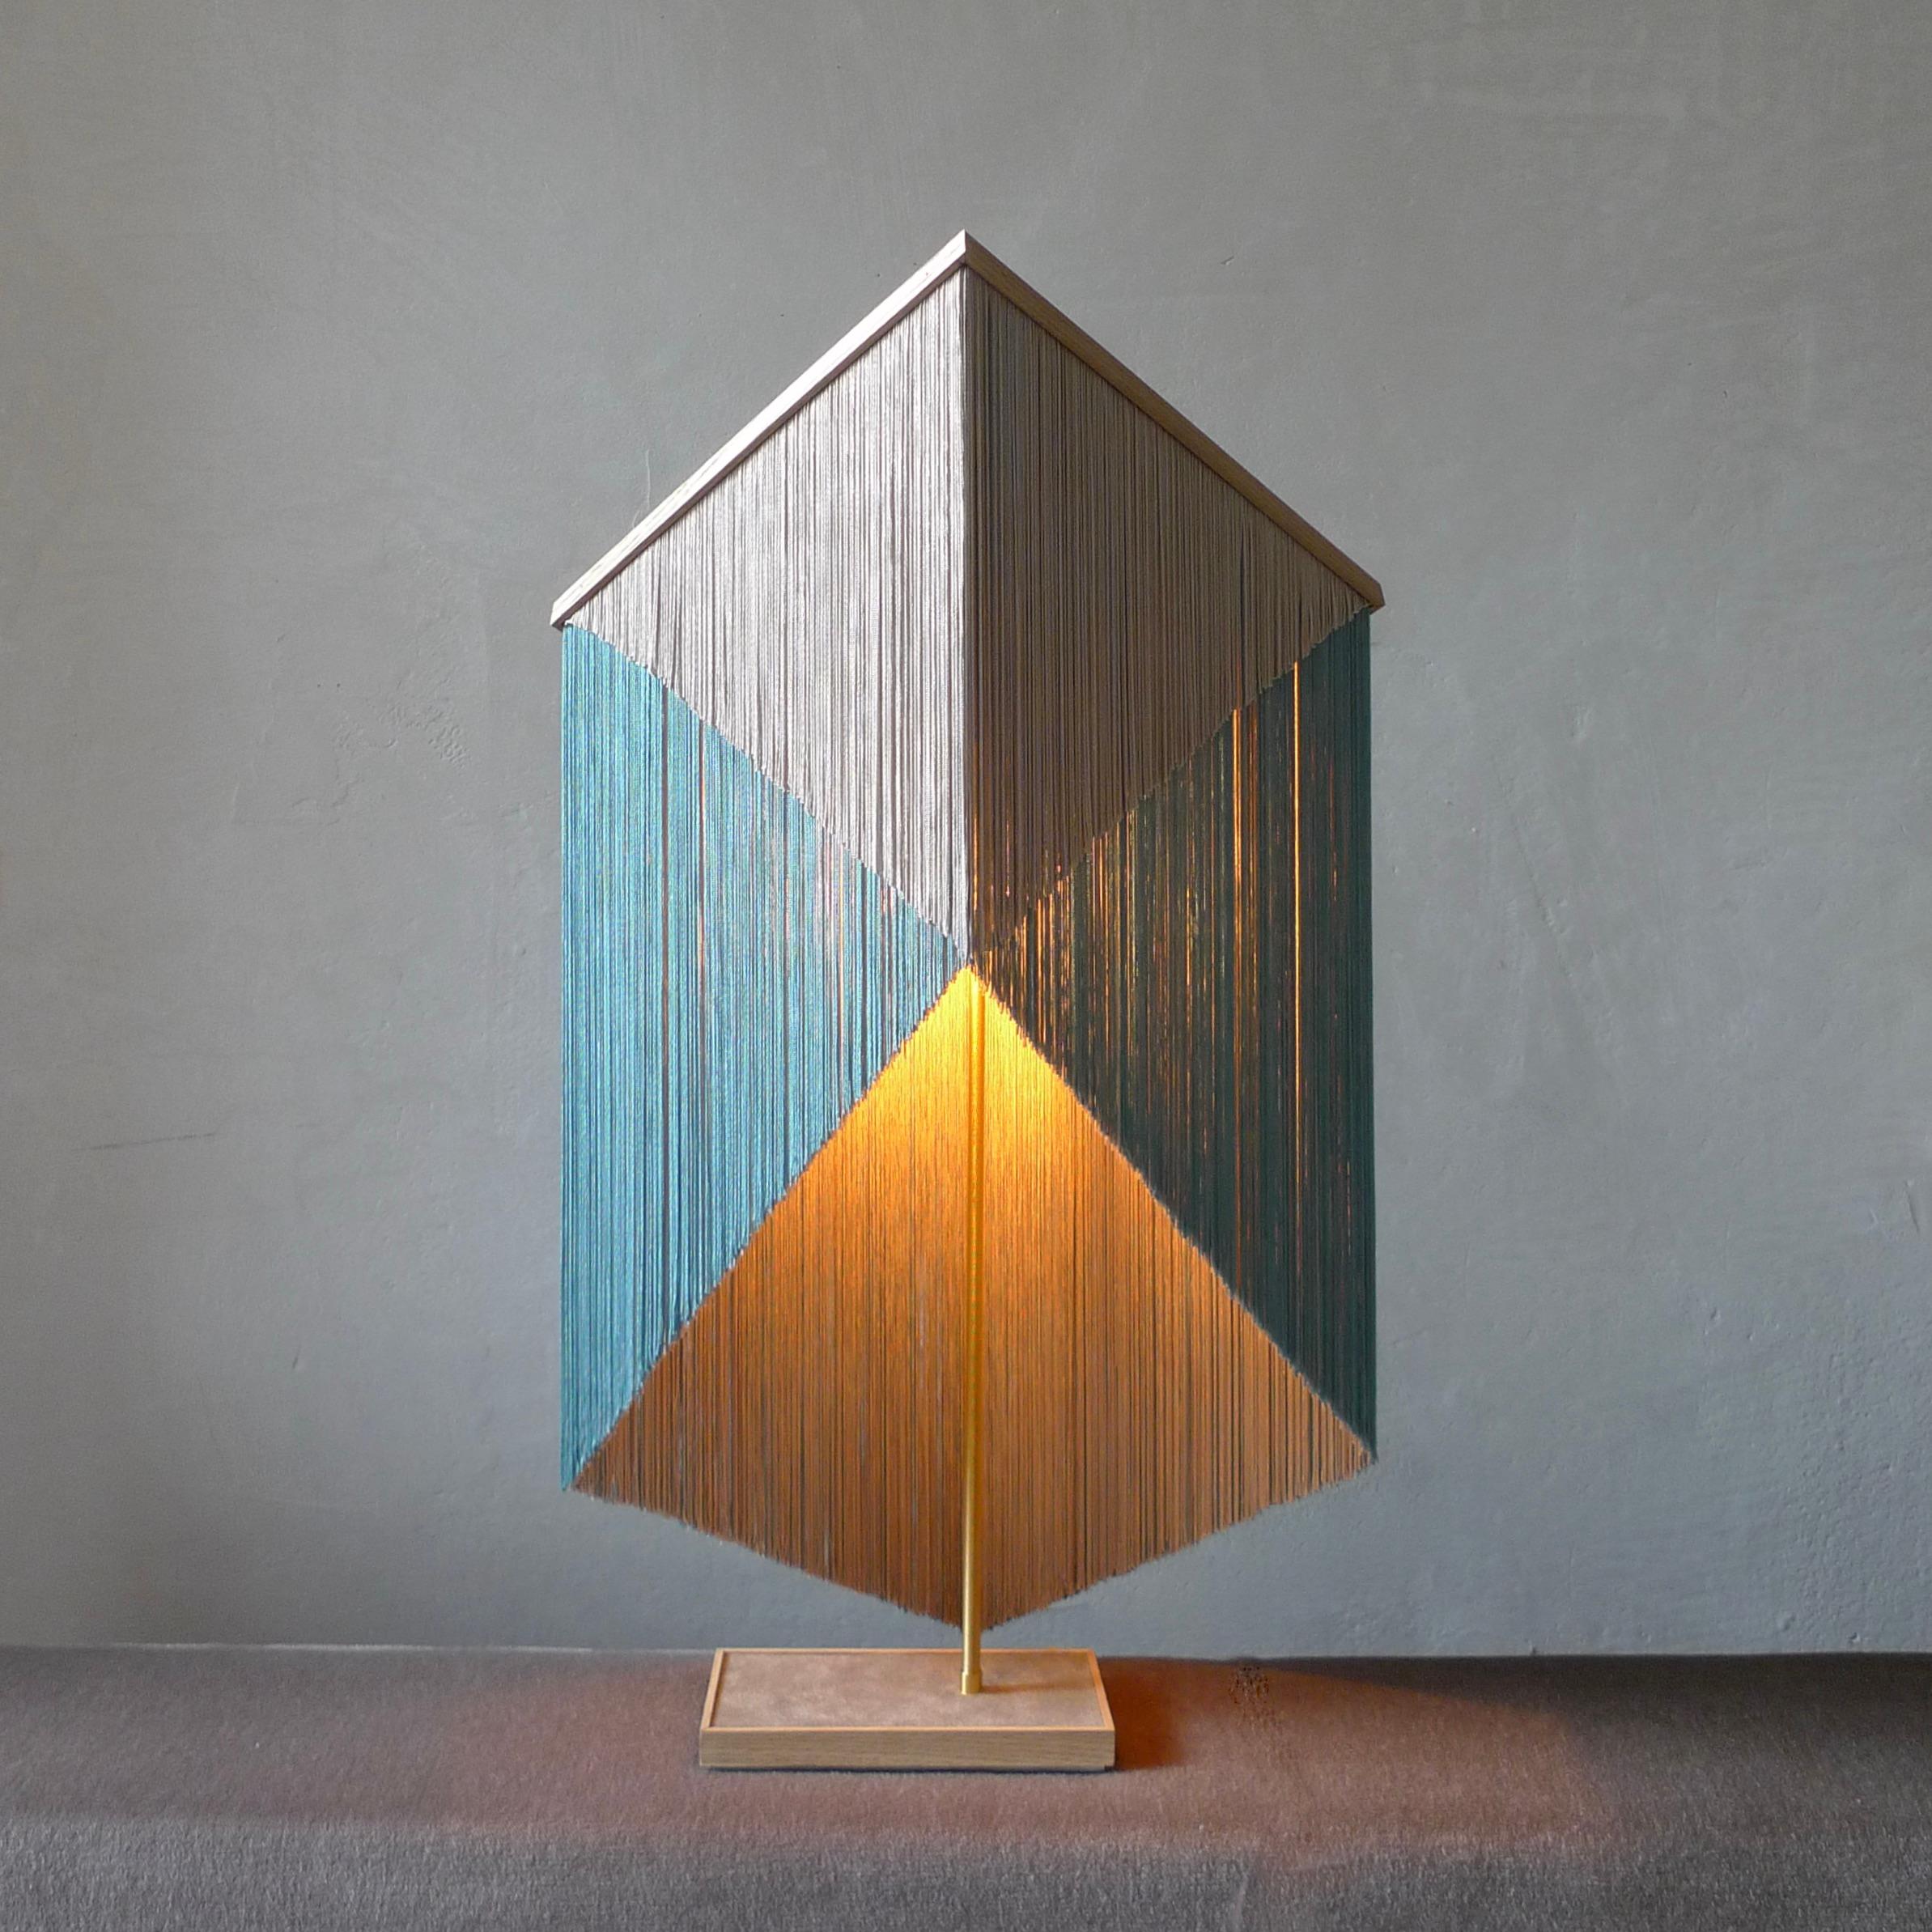 No. 29 table lamp by Sander Bottinga
Object size 3
Dimensions: W 31 x D 31 x H 57 - 75 cm
Materials: Brass, wood, leather, viscose fringes
Variations available. 

Handmade in brass, wood, leather and 3 double layered viscose fringes